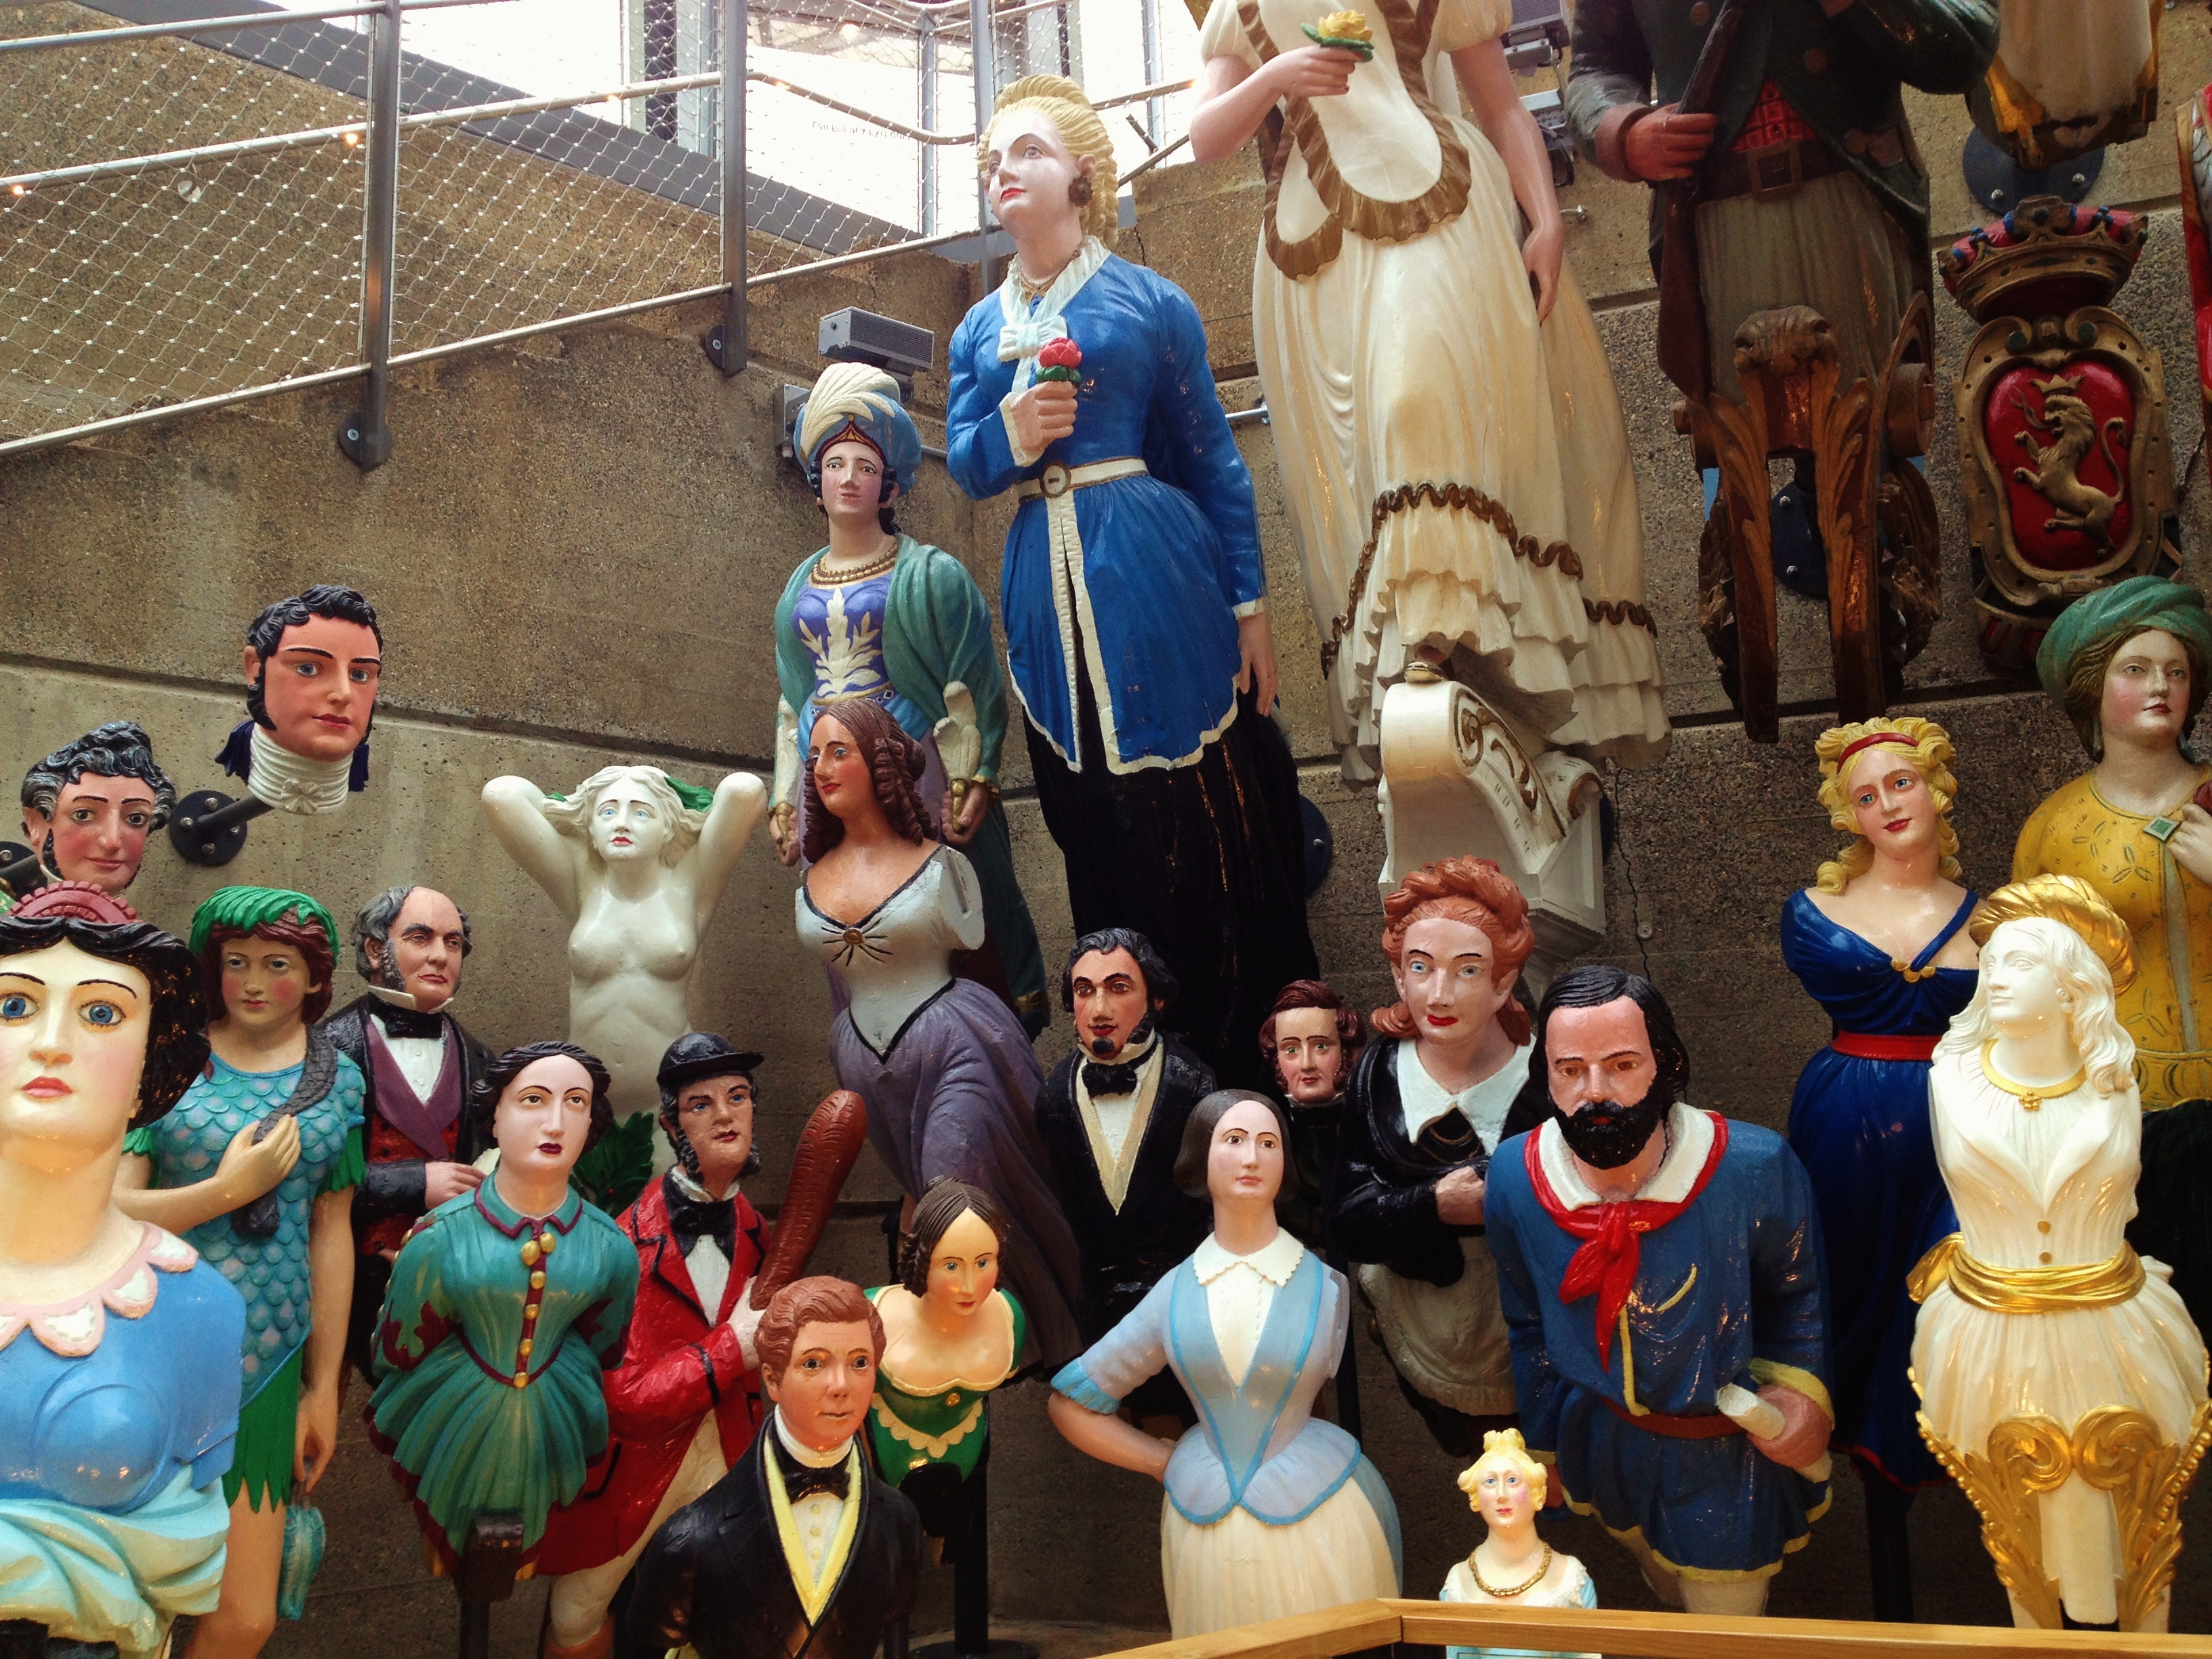 The Long John Silver Collection of figureheads, at the Cutty Sark museum.